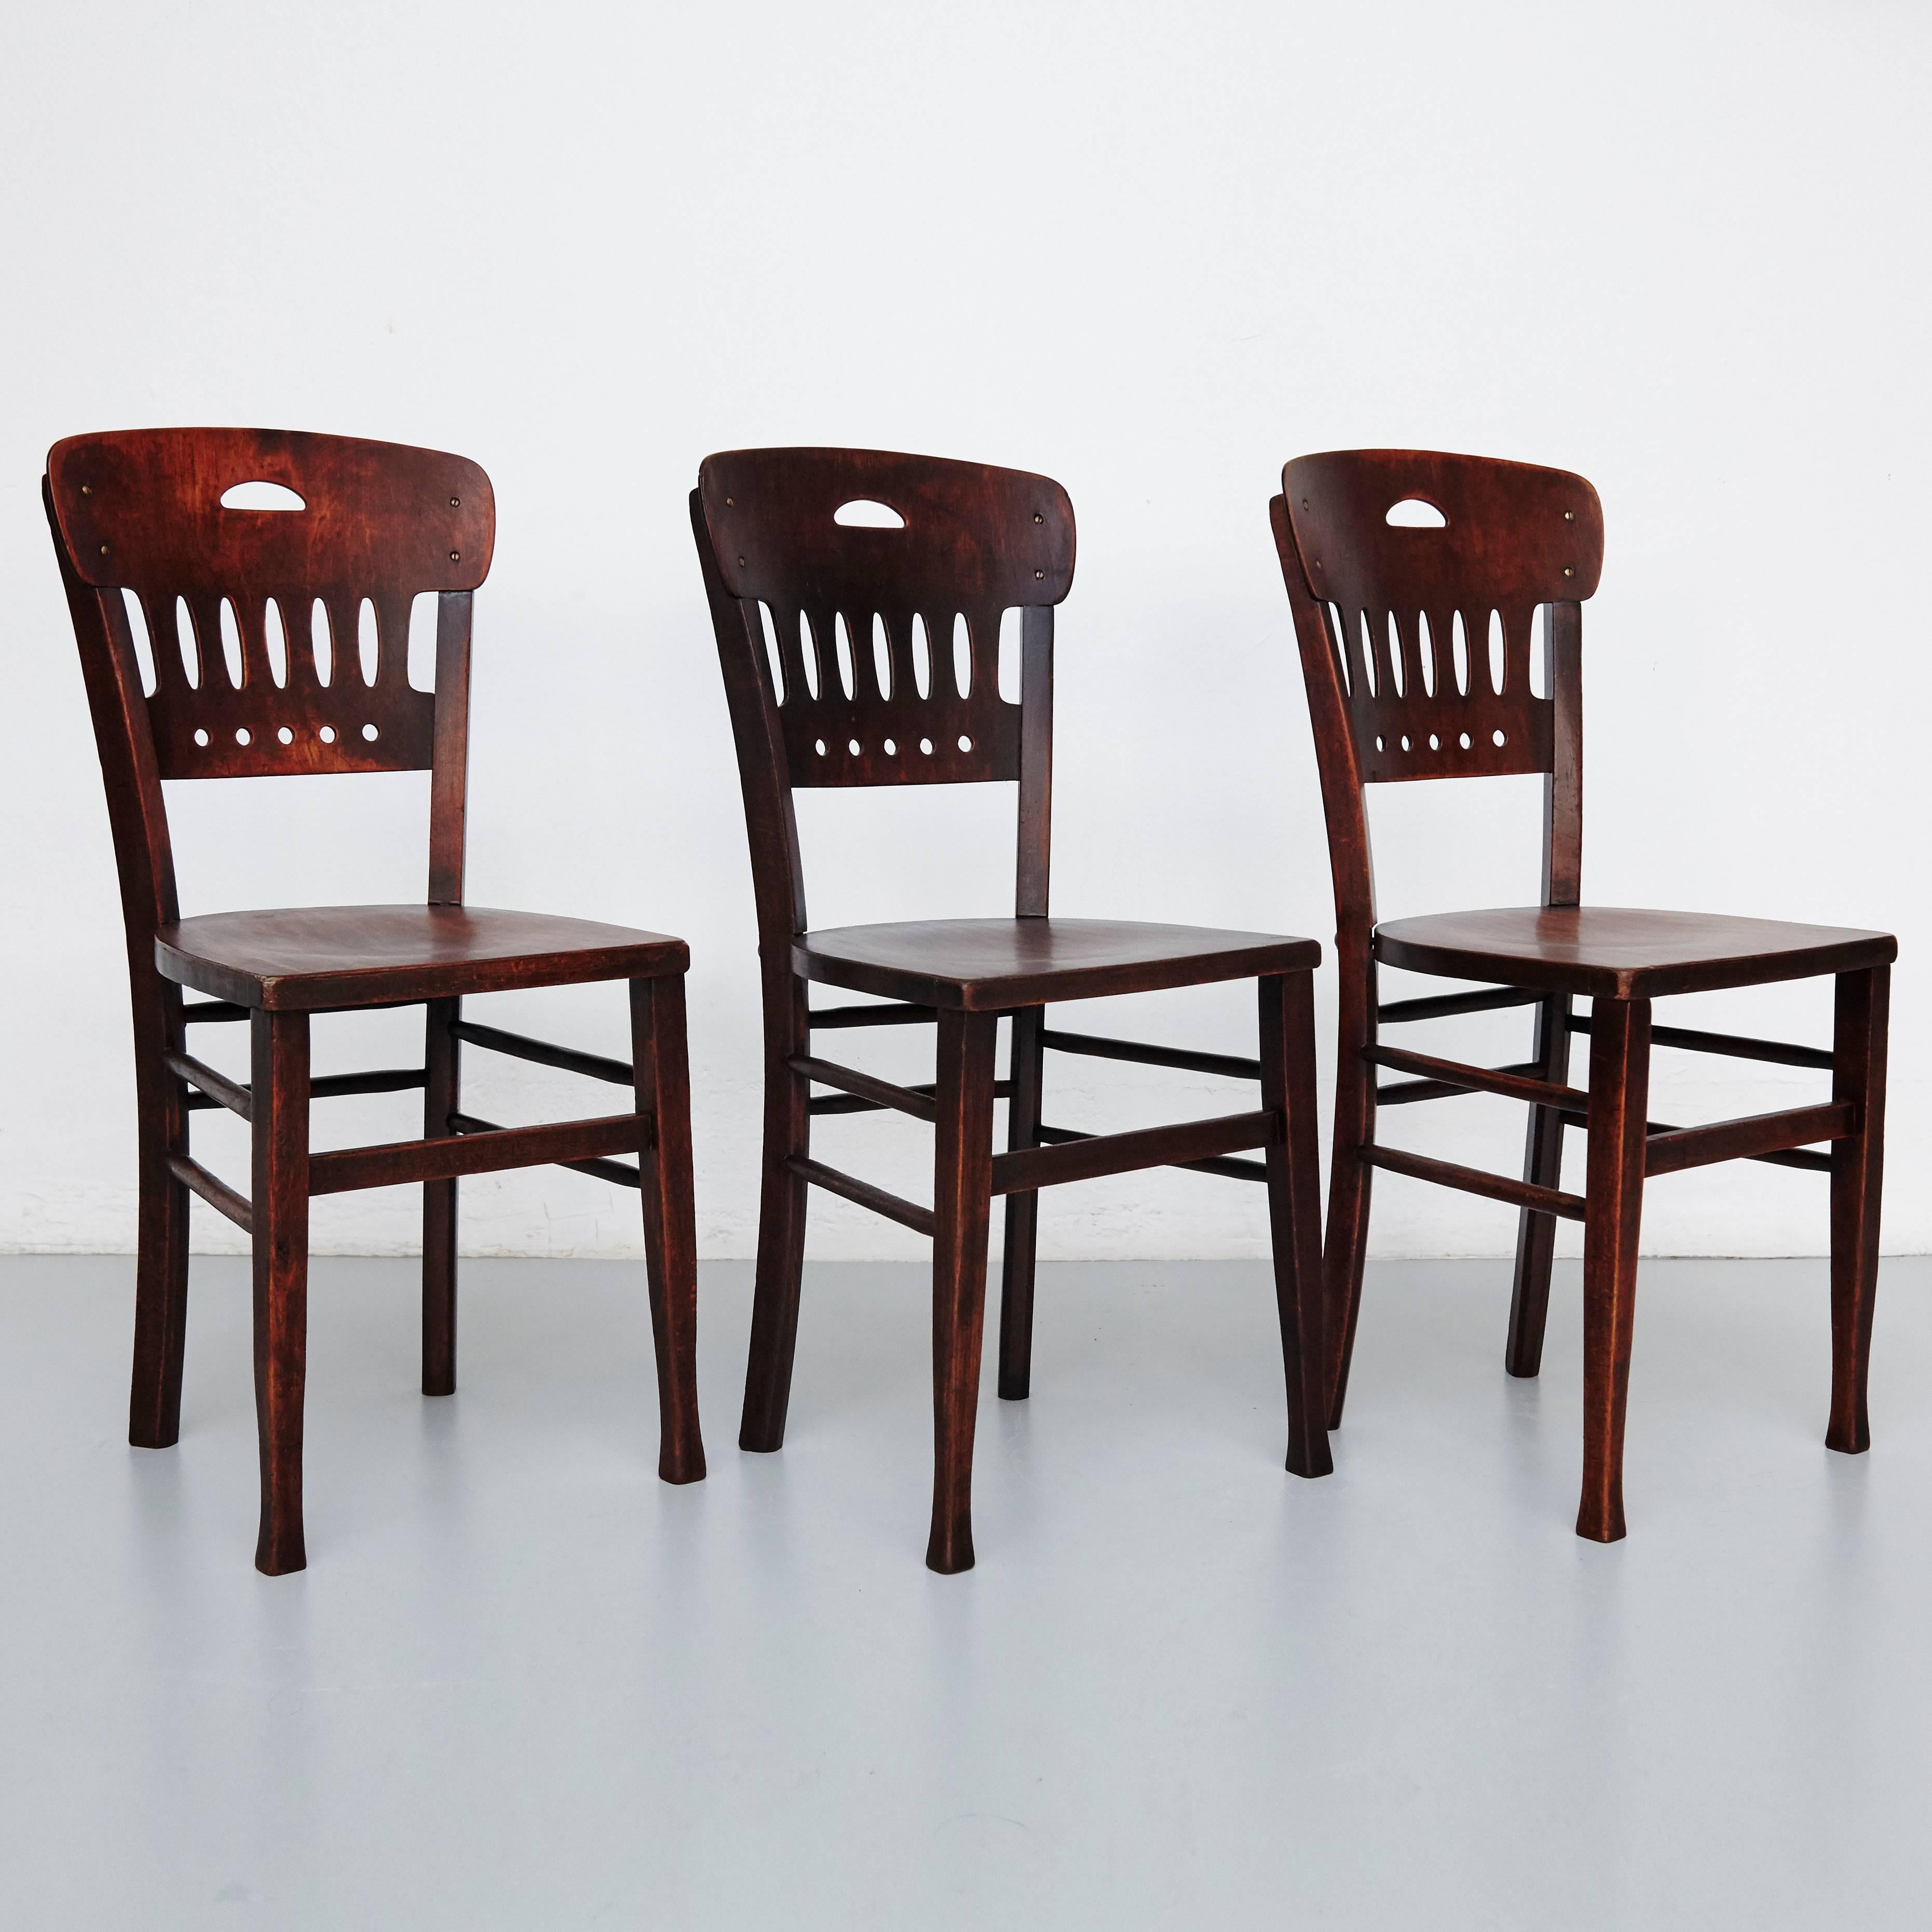 Set of 12 bistro chairs of the Luterma manufactured in Estonia, circa 1900.

In good original condition, with minor wear consistent with age and use, preserving a beautiful patina. 


Chairs of the old Luterma Estonian manufactory founded in